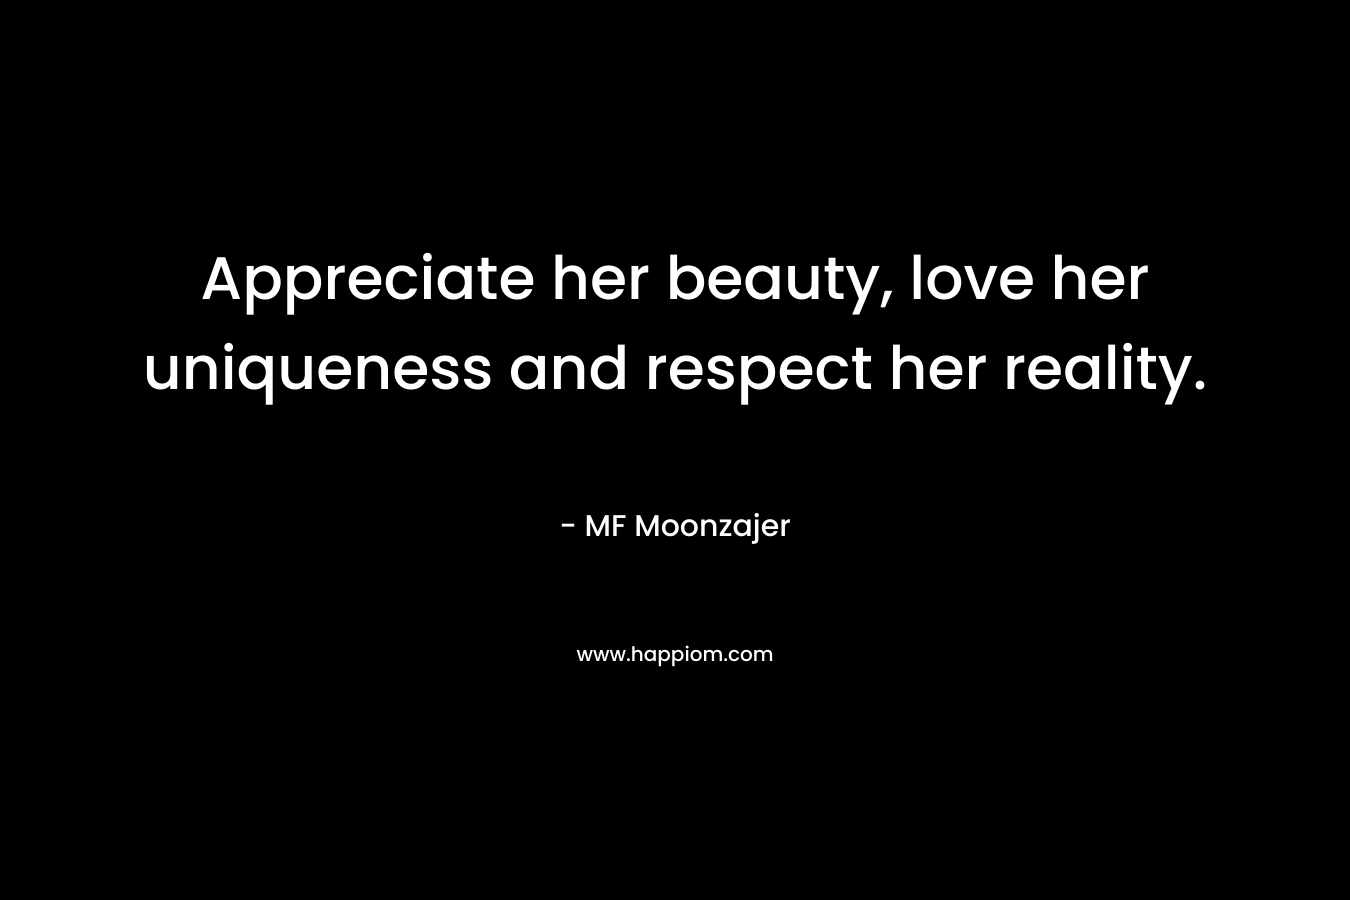 Appreciate her beauty, love her uniqueness and respect her reality.